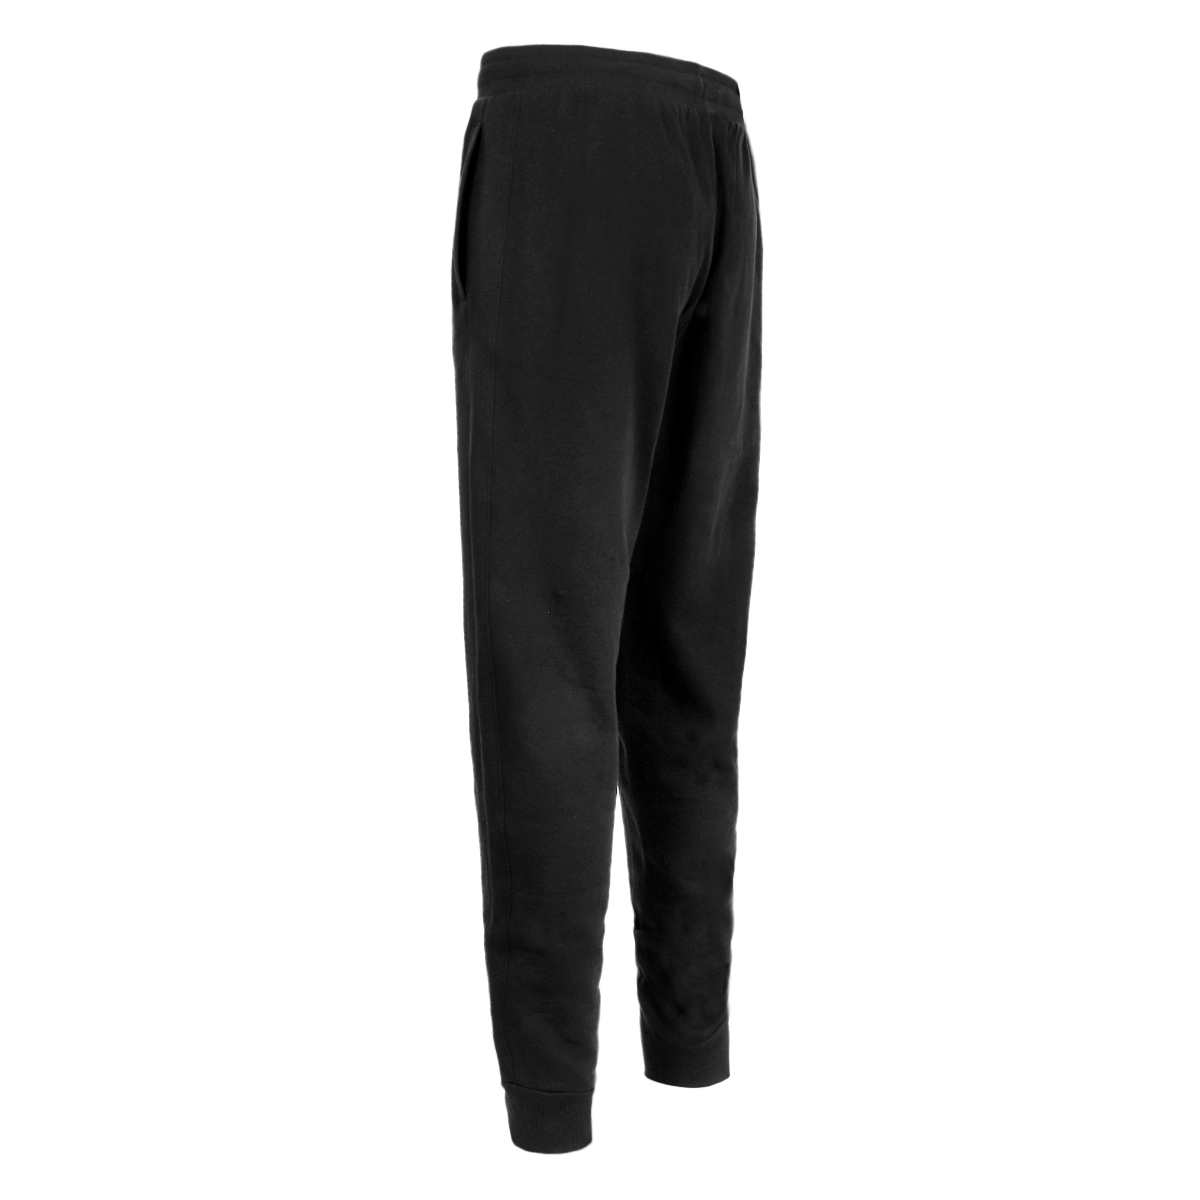 Under Armour 13207400203X Mens Rival Fleece Jogger Athletic Pants Charcoal 3X - image 3 of 3